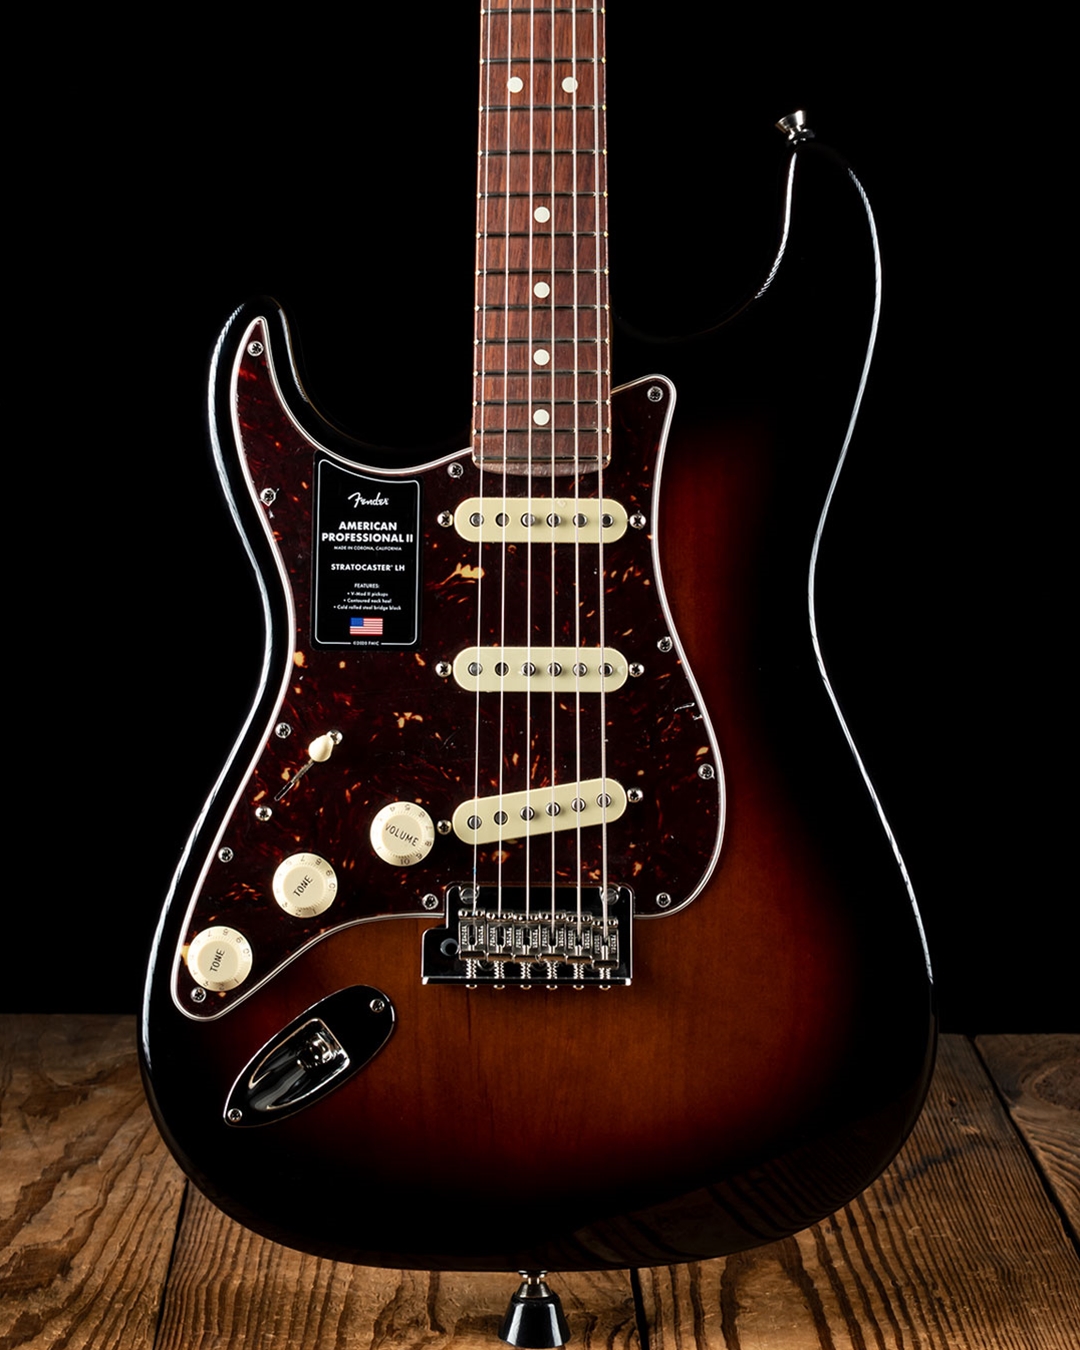 FENDER Fender USA American Professional II Stratocaster Left-Hand -Miami  Blue Rosewood-【US20044046】【3.69kg】《エレキギター》